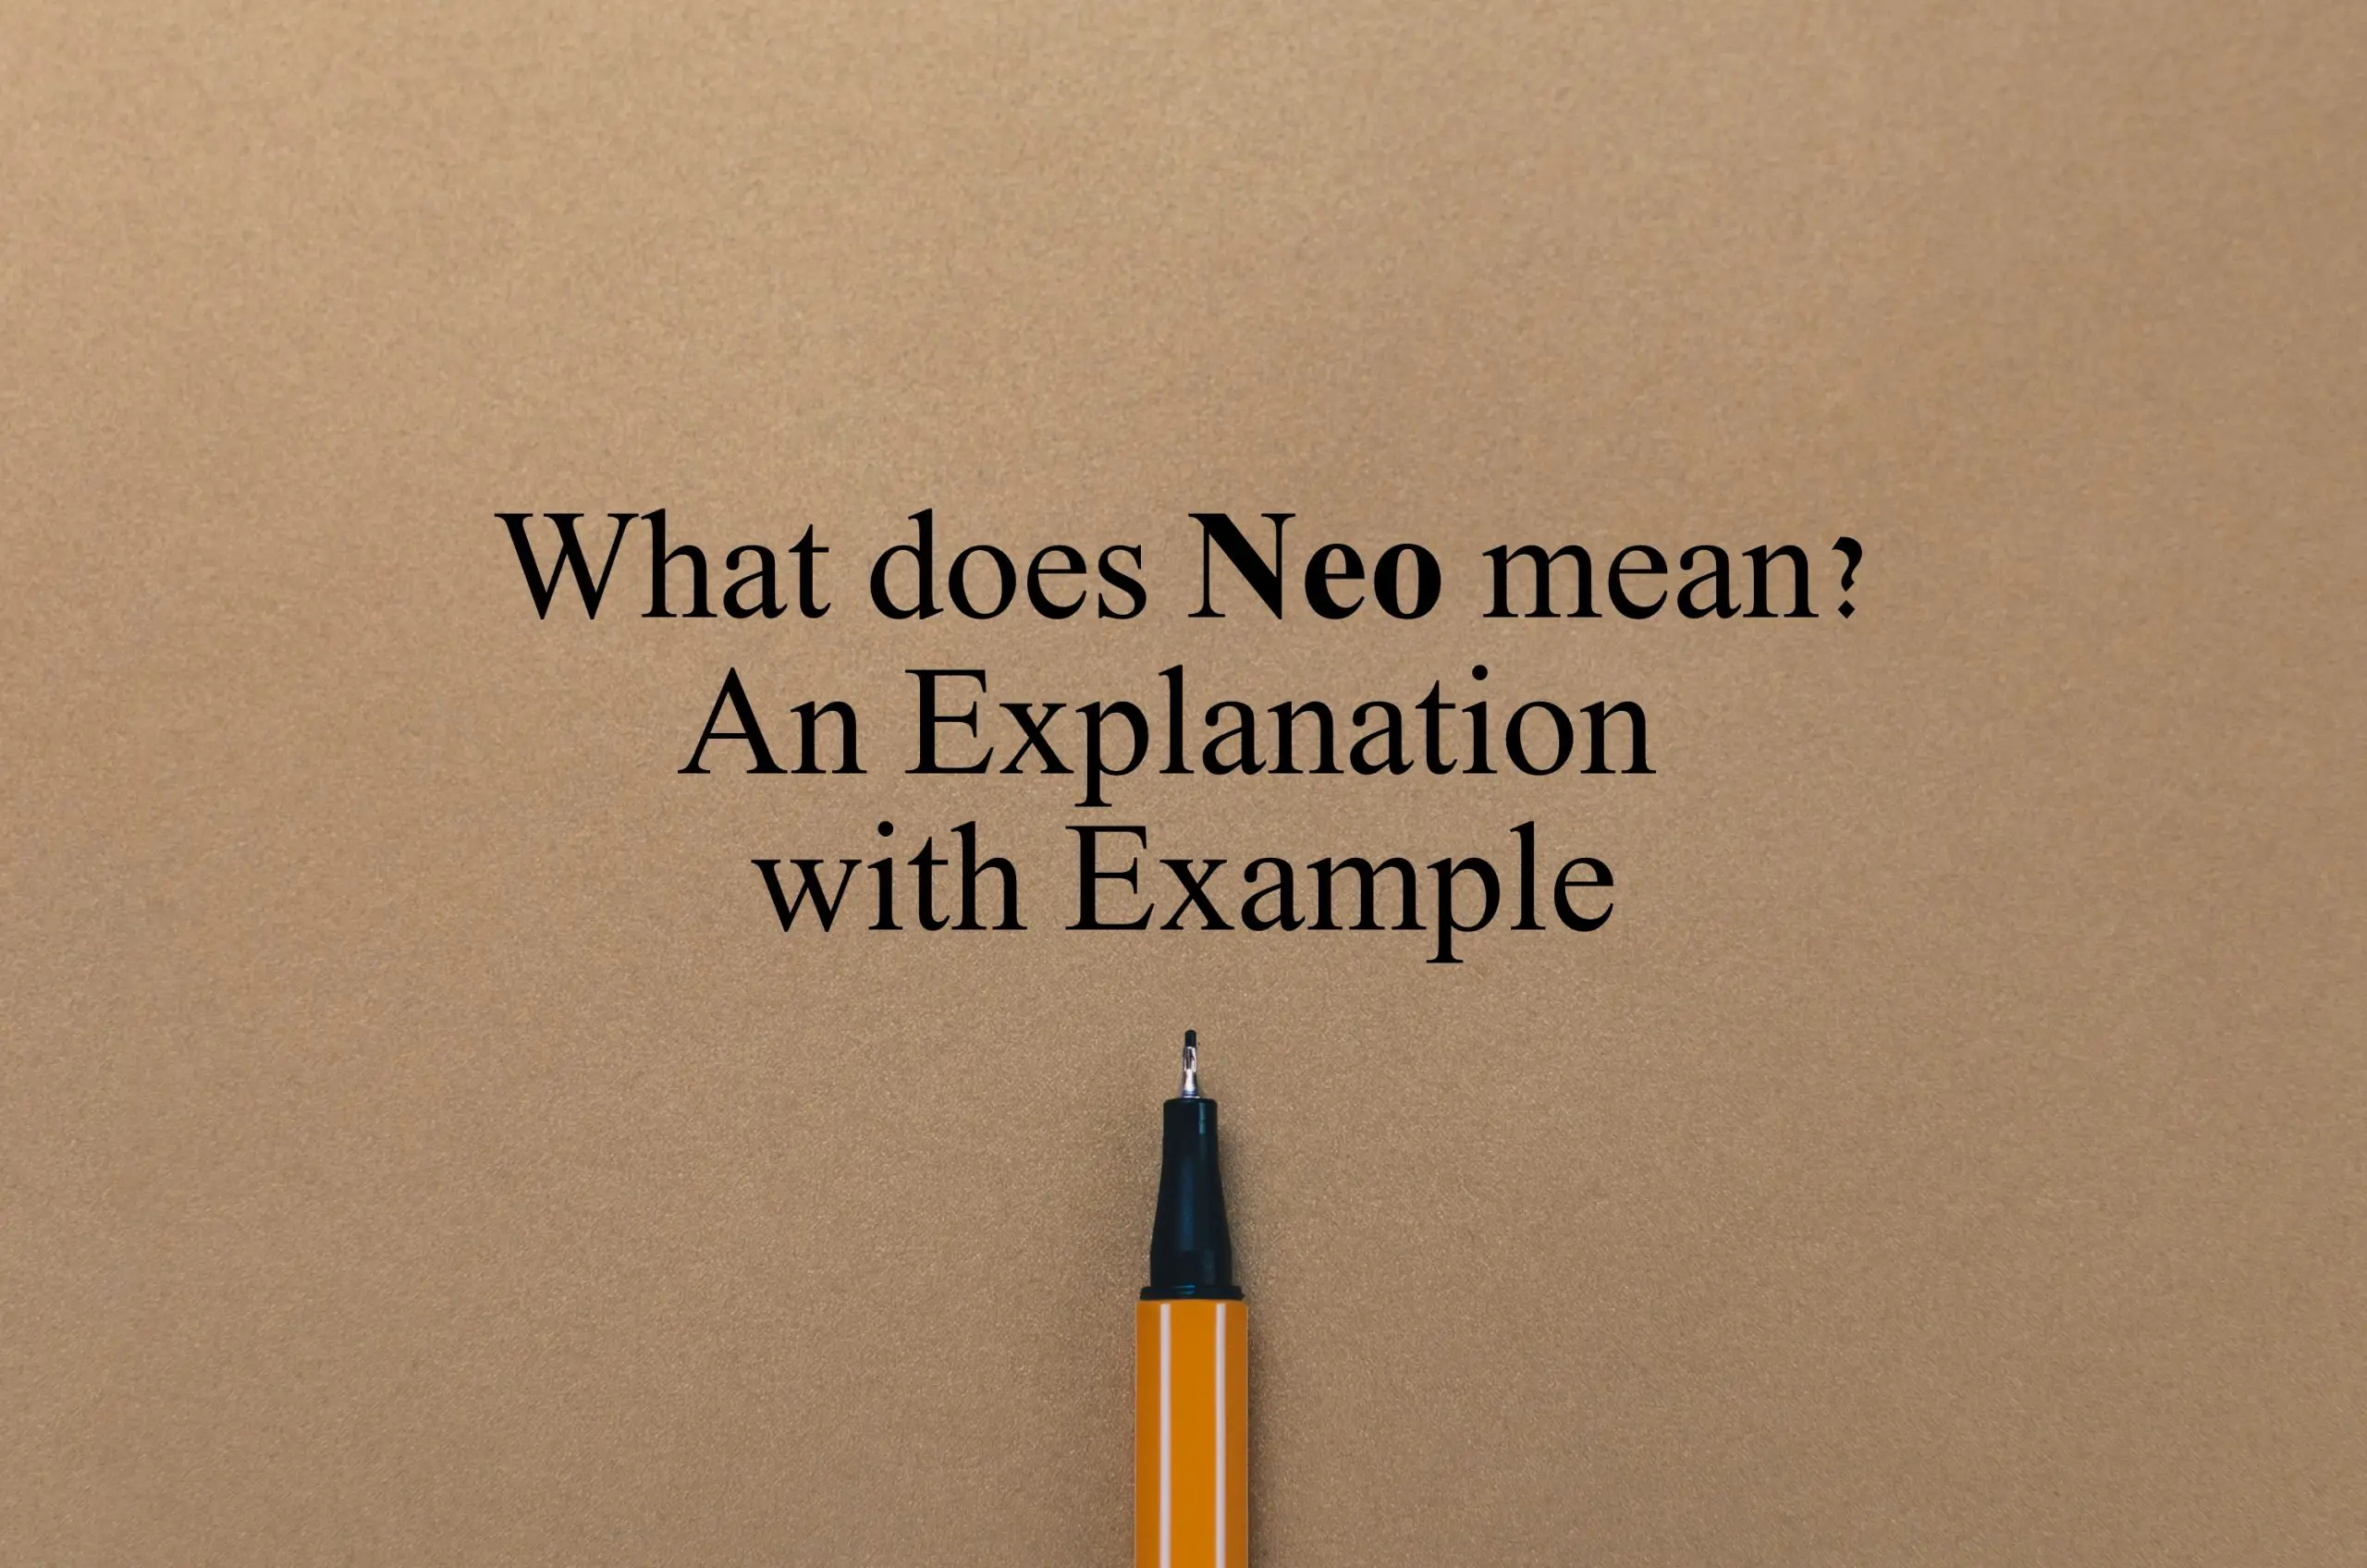 What does neo mean? Explaining neo meaning.